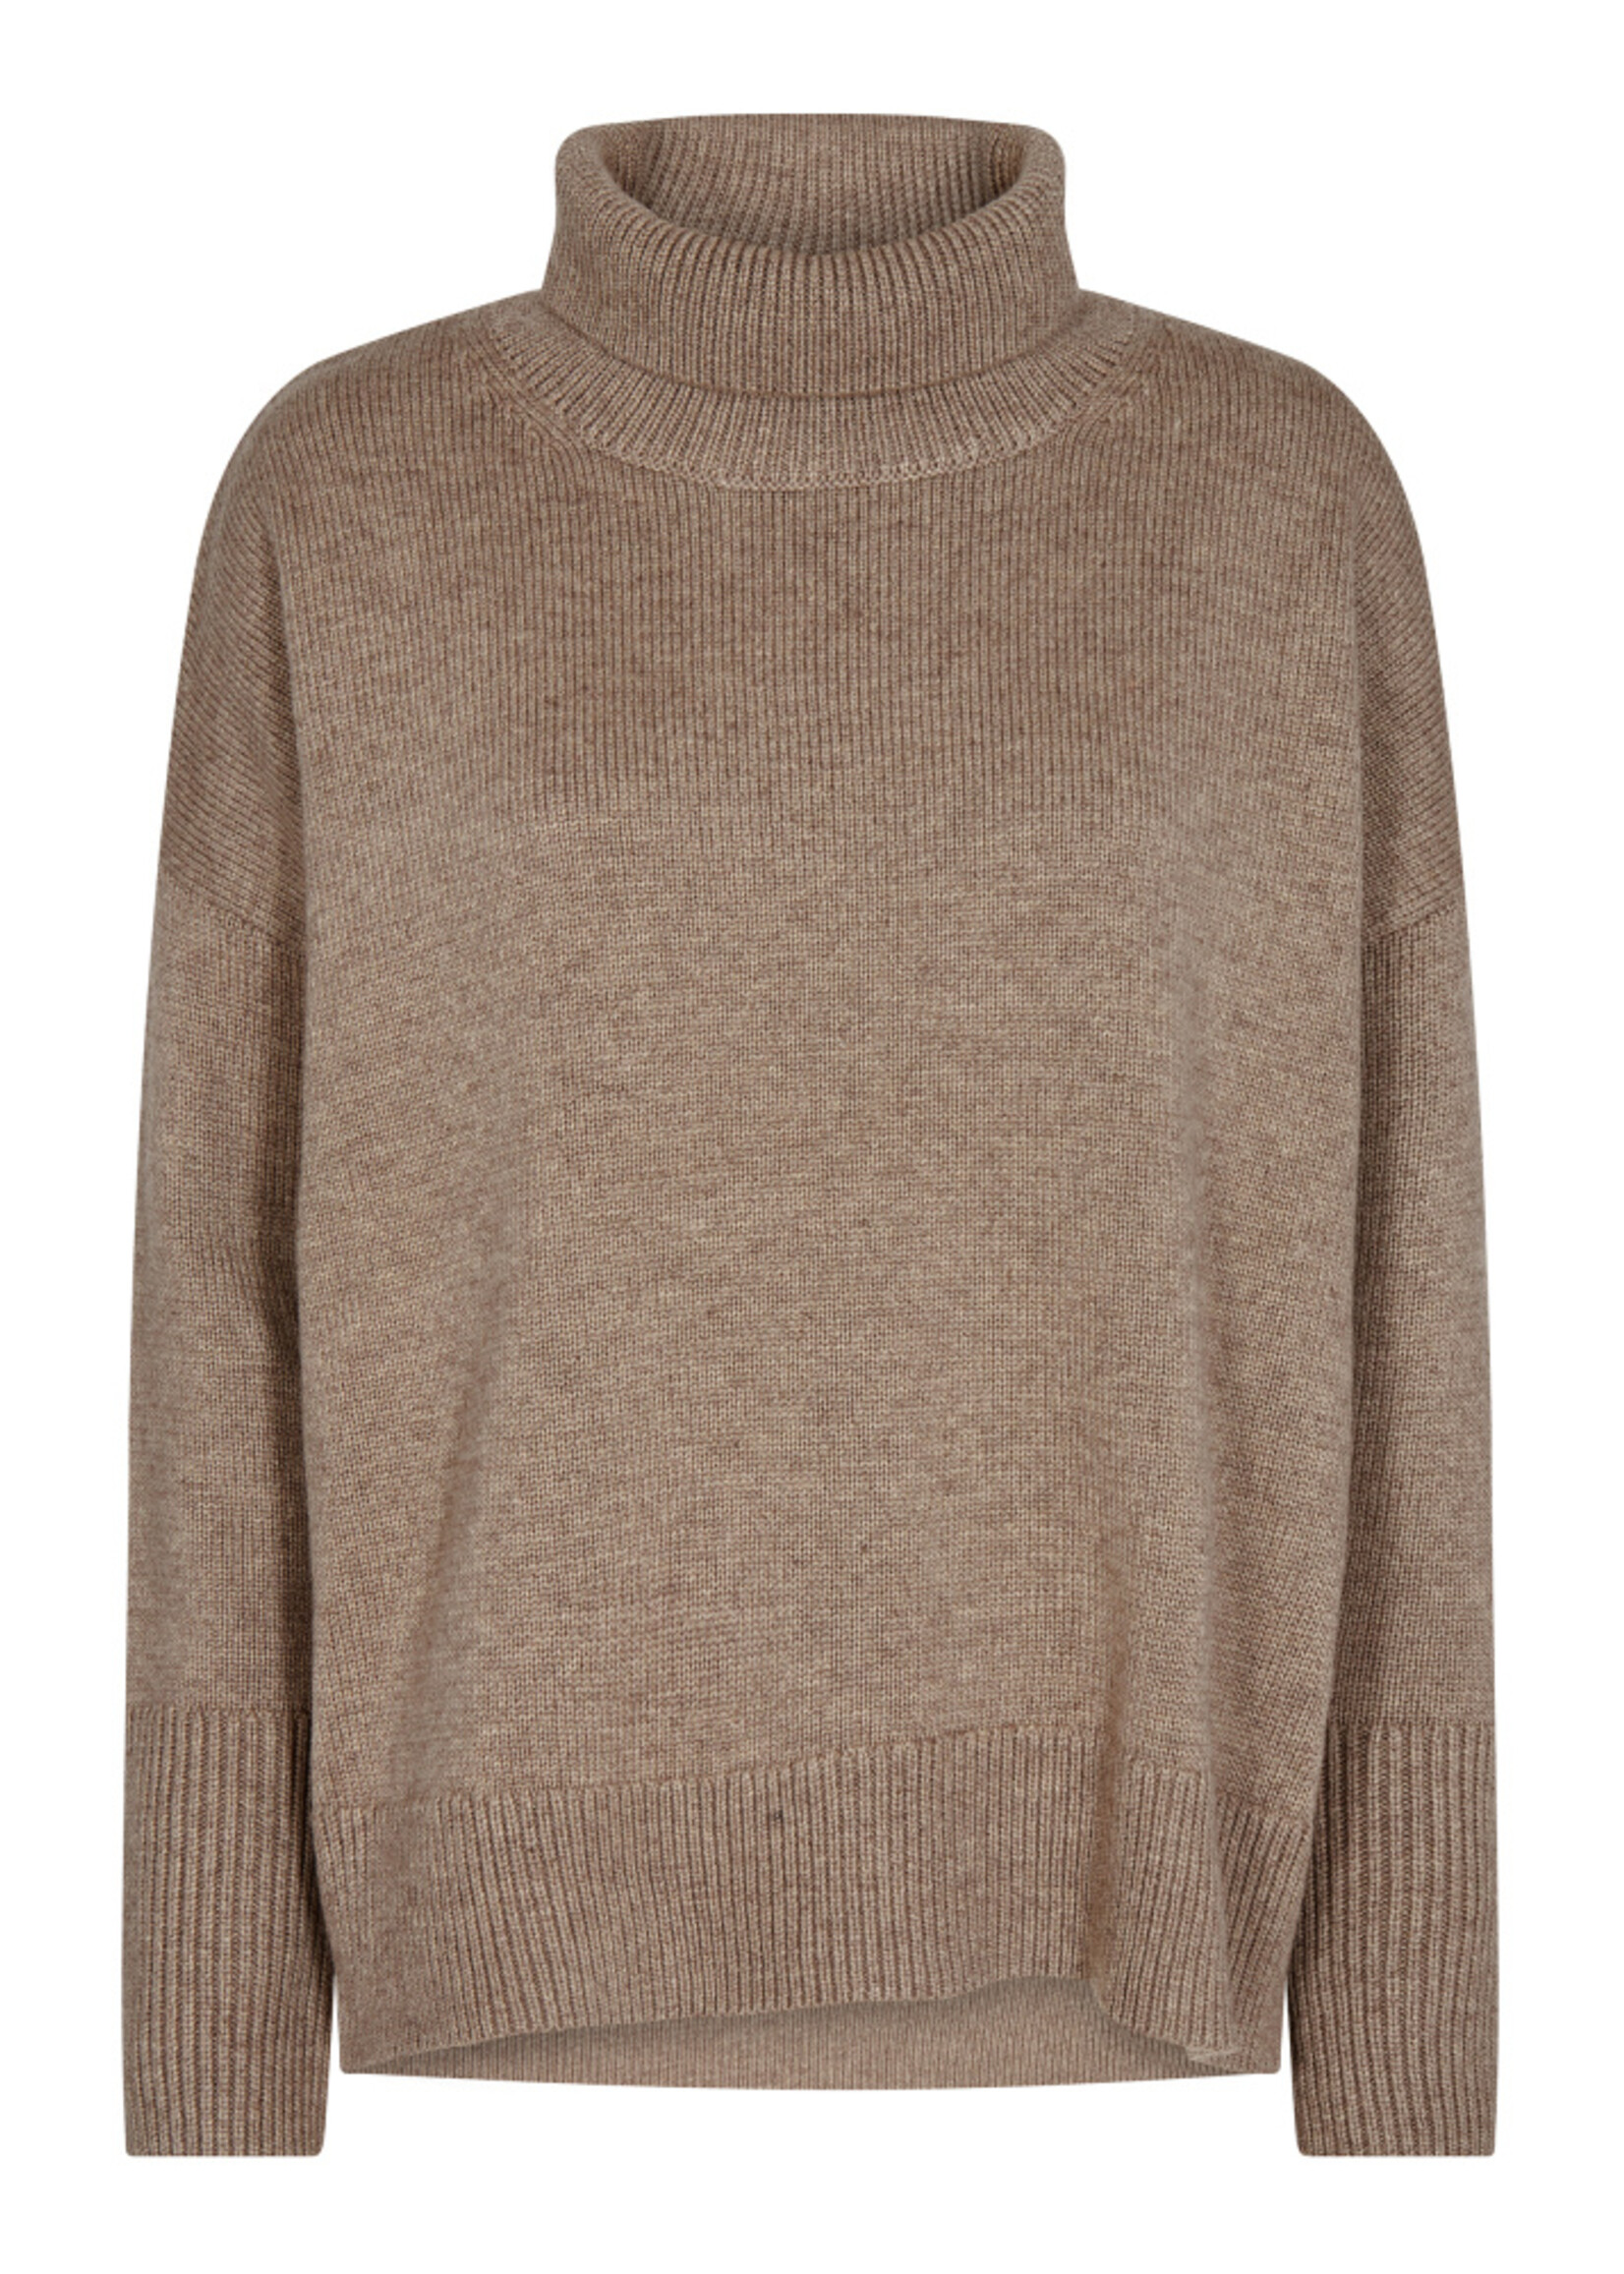 Co'Couture MajaCC Roll Neck - Latte